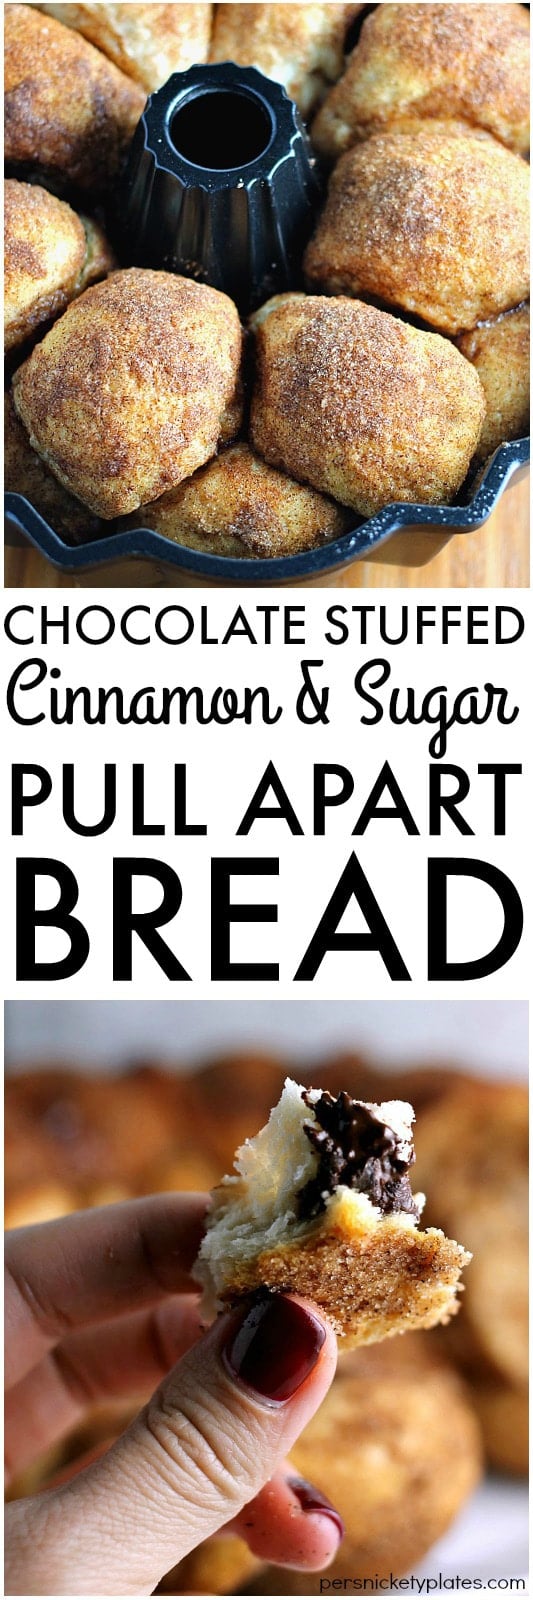 Chocolate Stuffed Cinnamon & Sugar Pull-Apart Bread - a long title for a simple & delicious recipe that only takes 5 ingredients and about 30 minutes to put together. | Persnickety Plates AD #WarmTraditions